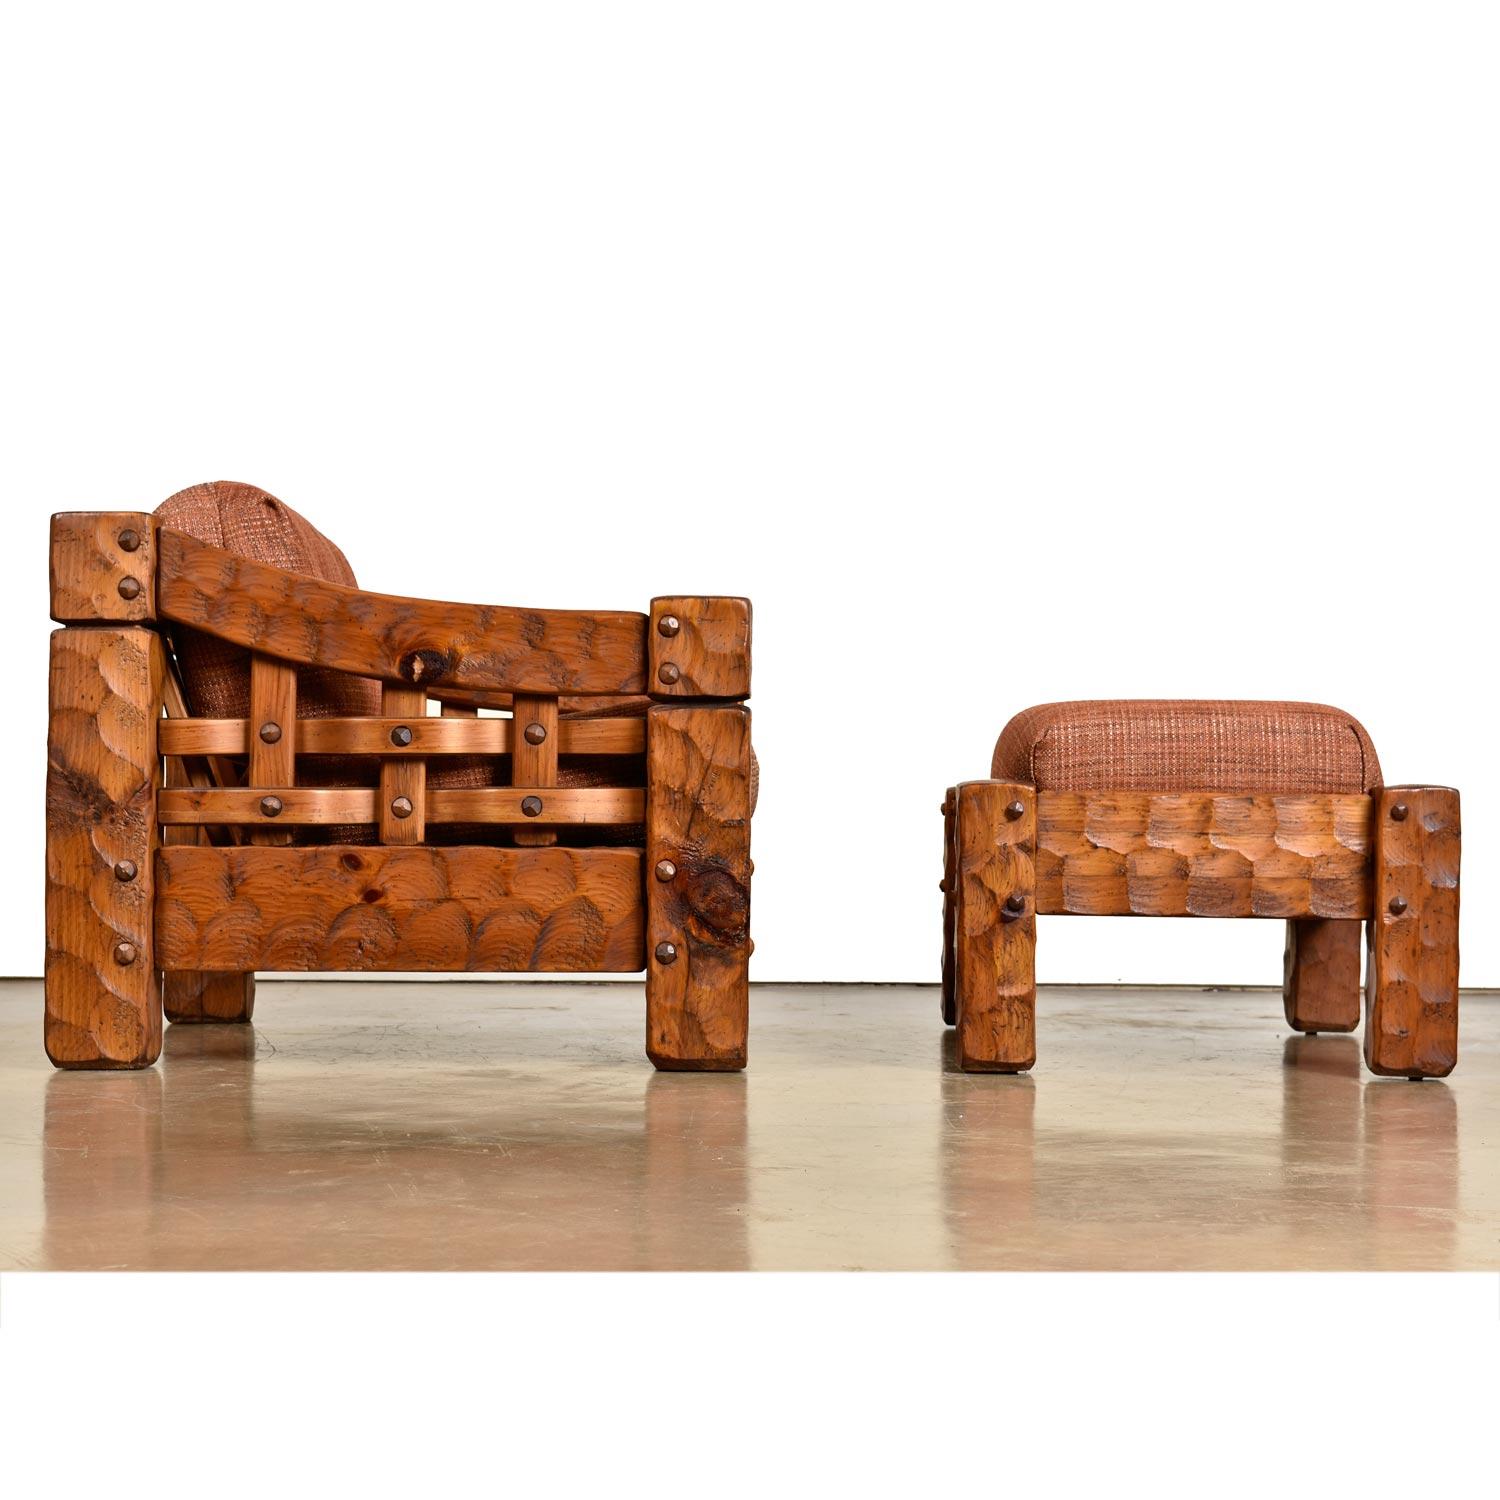 Asking someone how much they earn is tacky. This set isn't tacky, it's just on another level. 

Rustic modern is the best way we can describe this truly unique lounge chairs and ottoman set. Believe it or not, this is only a fraction of a colossal